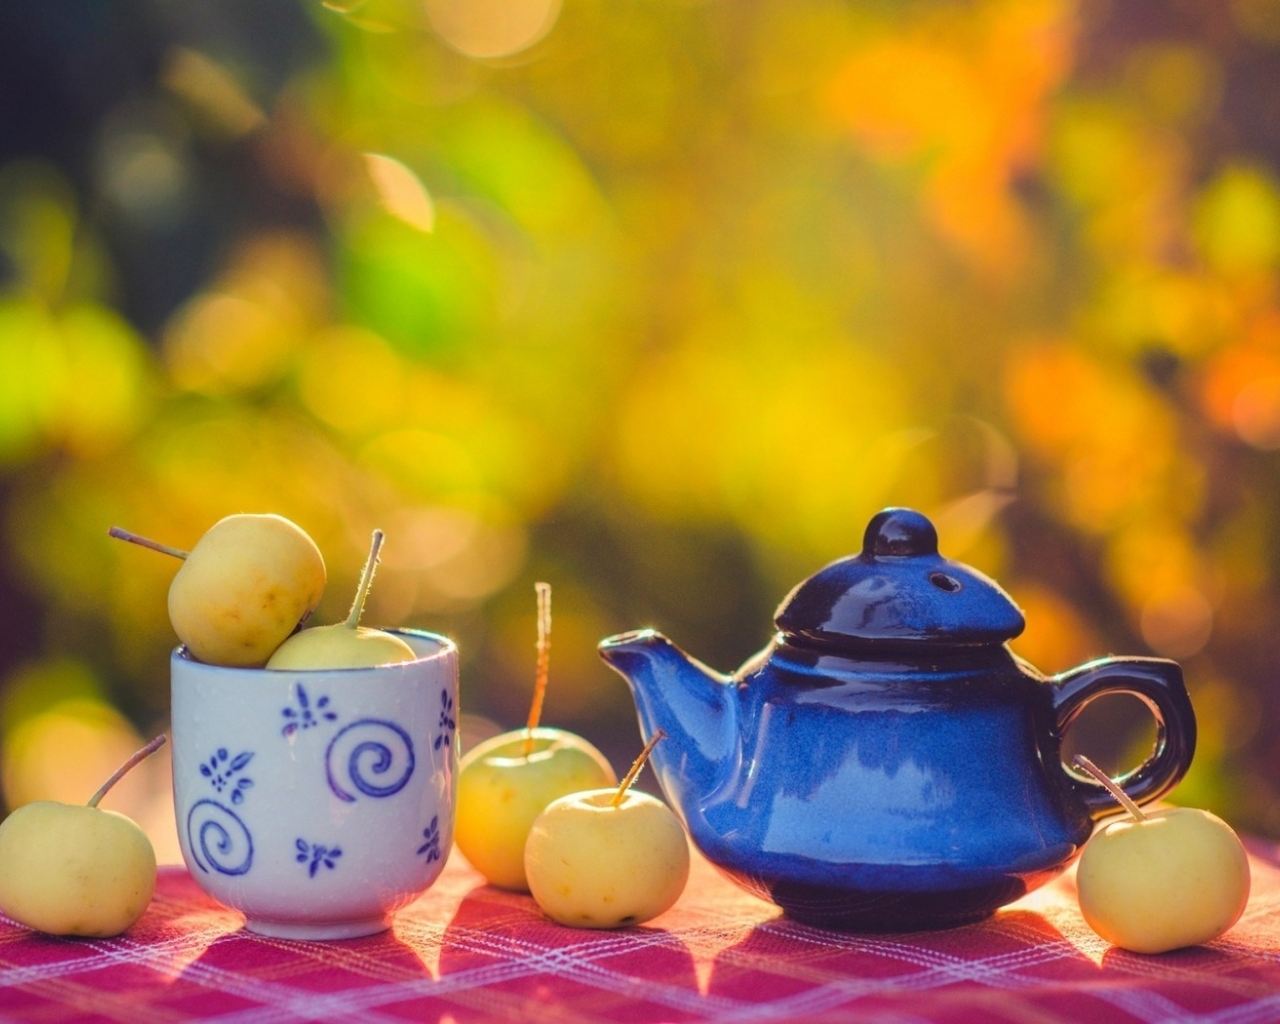 Apples Cup Teapot Table Autumn Wallpaper In Other